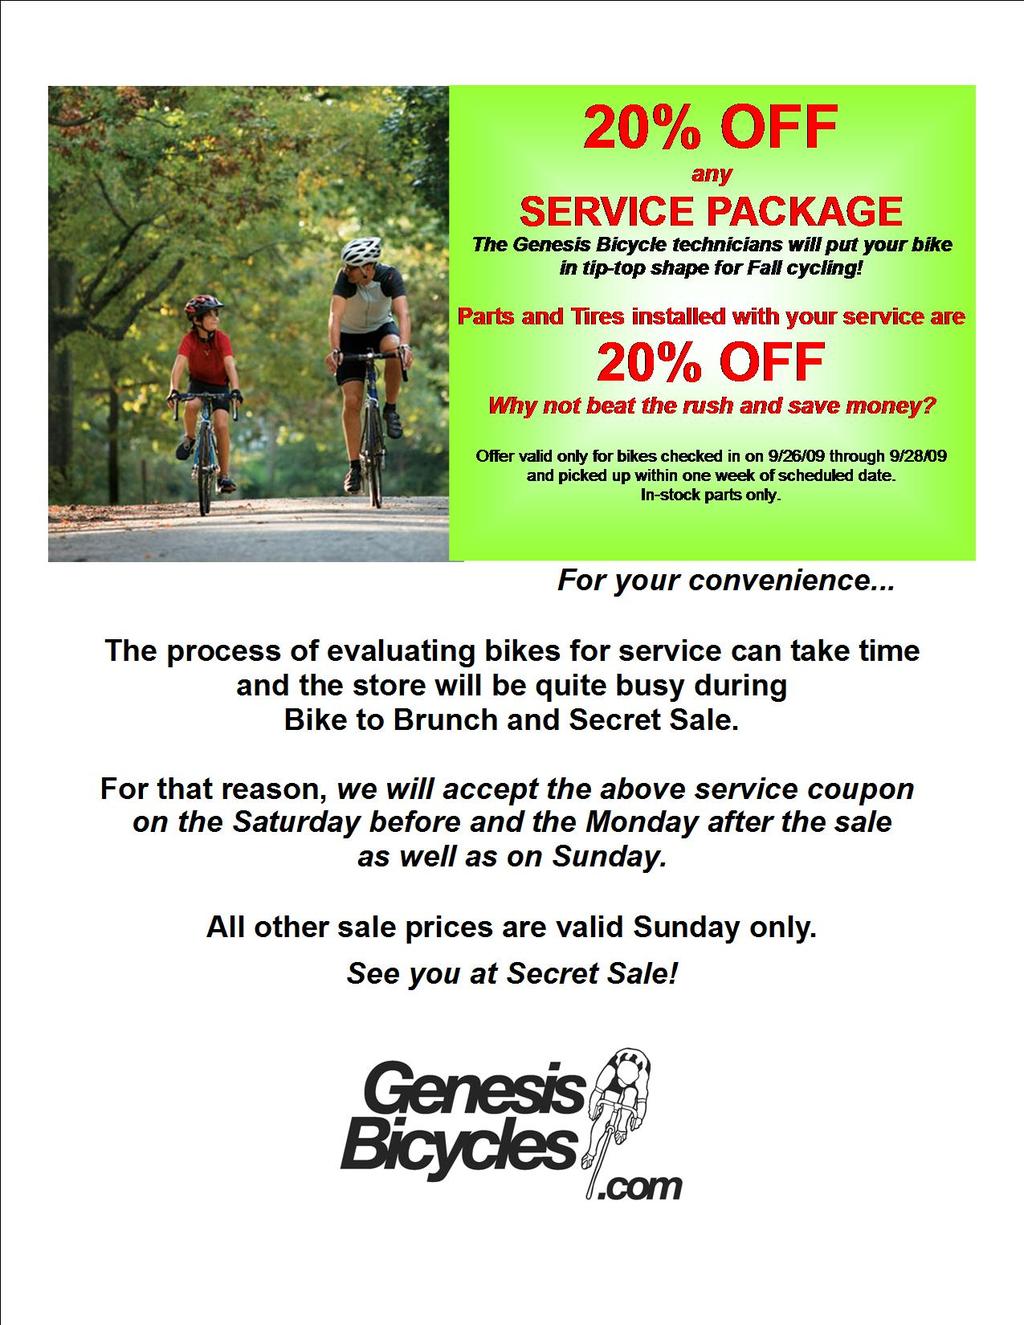 Genesis is giving away A BRAND-NEW CANNONDALE